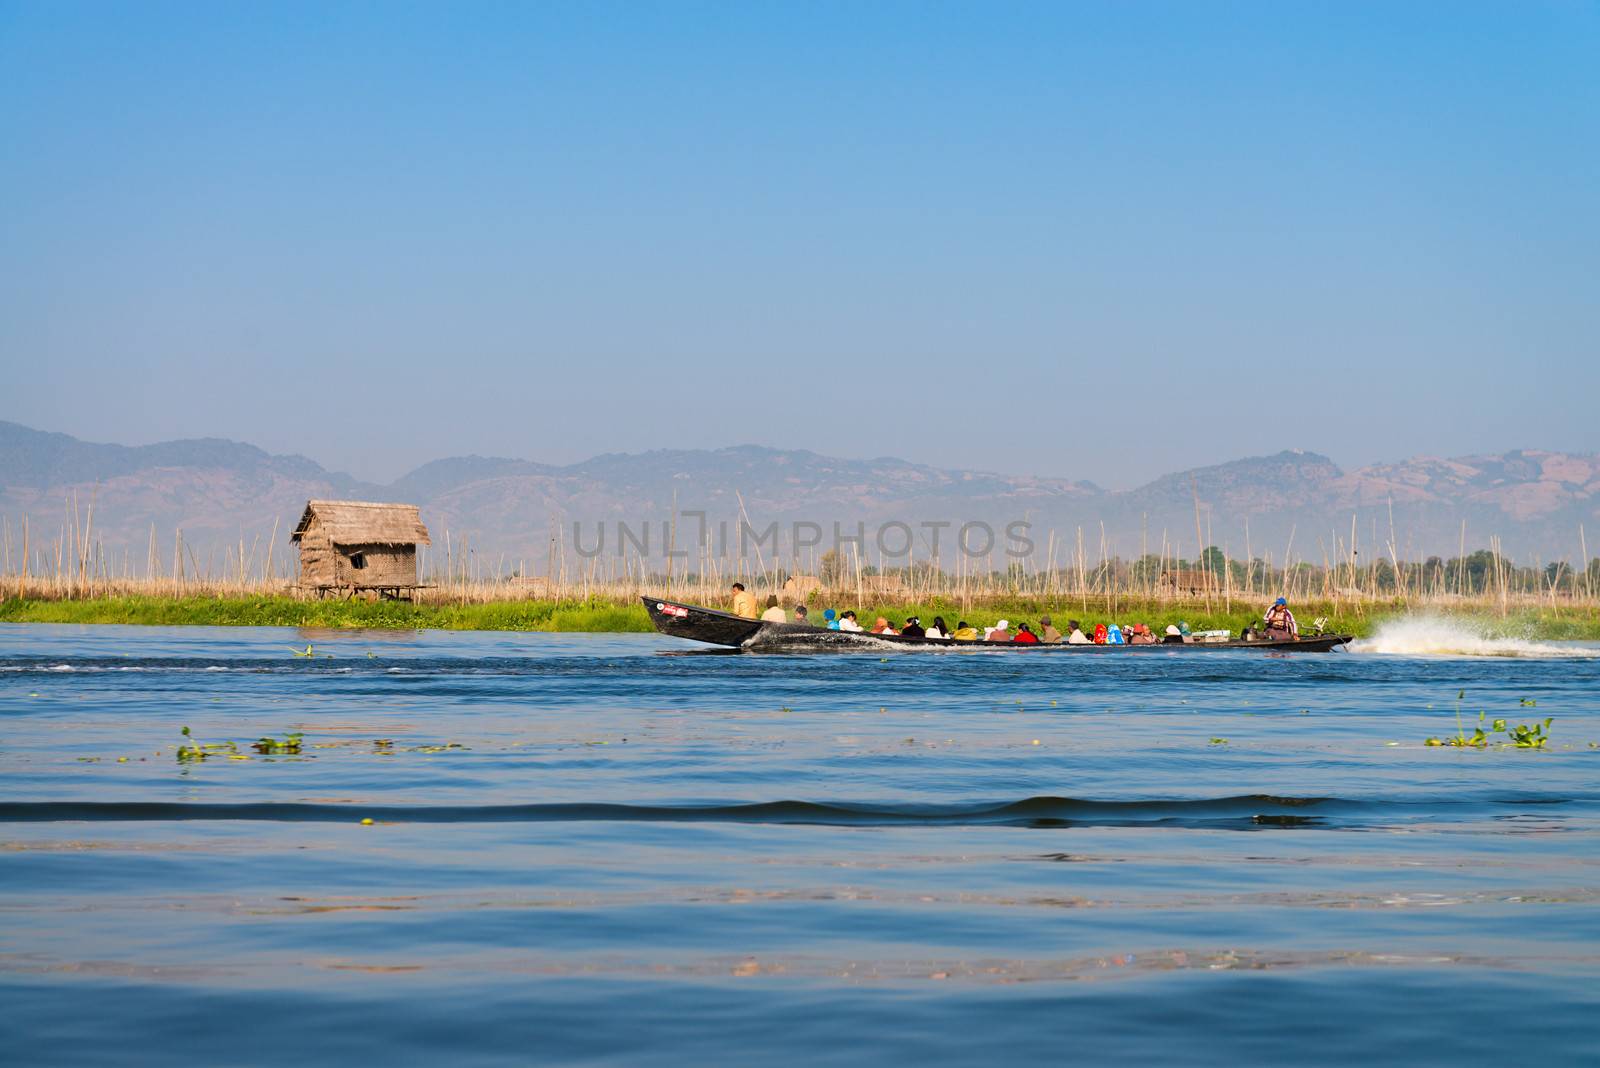 INLE LAKE, MYANMAR (Burma) - 07 JAN 2014: People transportation wooden long boat with motor fast move on blue water with floating gardens on background. 